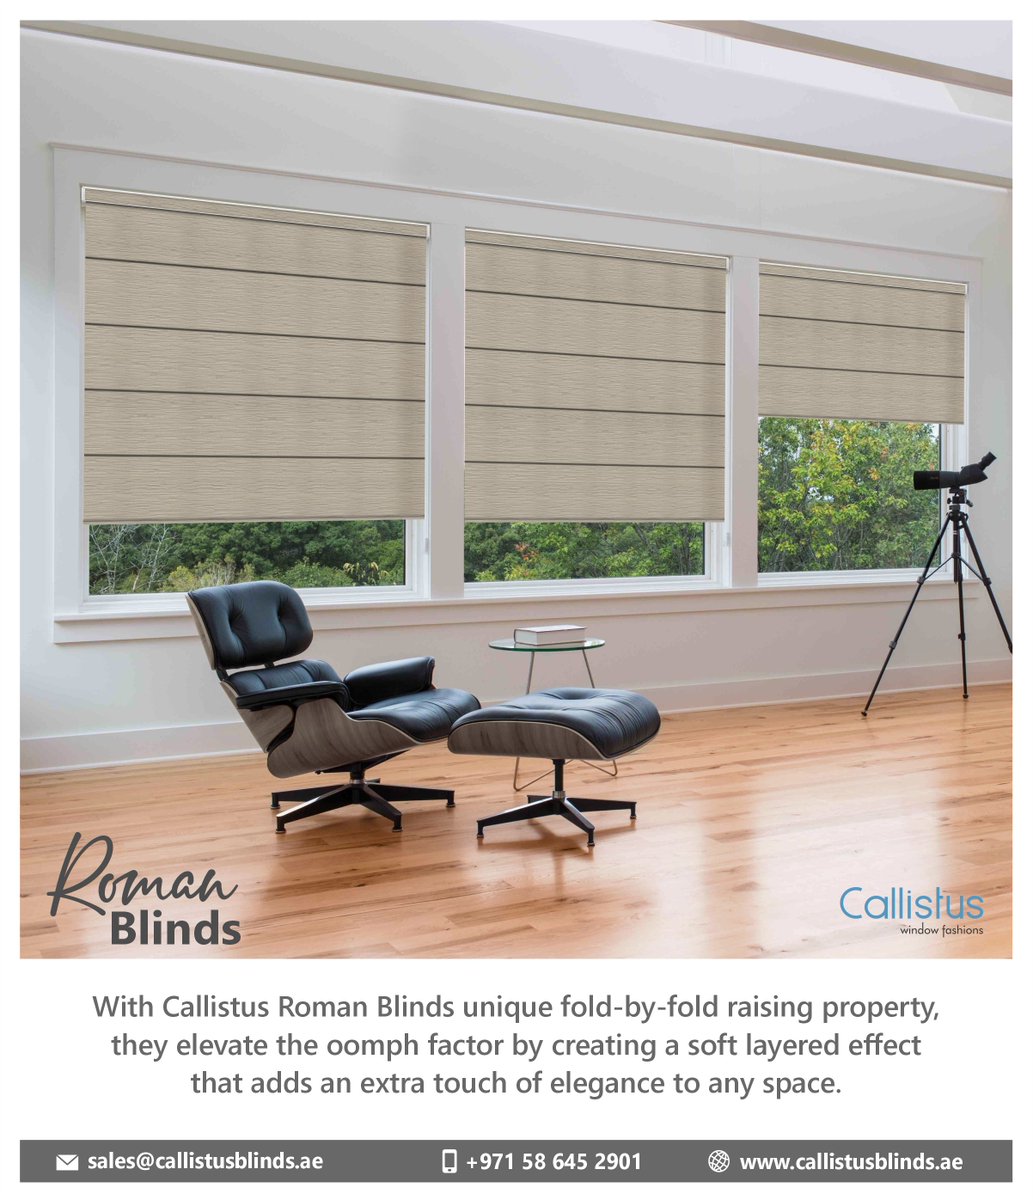 With Callistus Roman Blinds unique fold-by-fold raising property, they elevate the oomph factor by creating a soft layered effect that adds extra touch of elegance.
 
callistusblinds.ae

 #romanblinds #home #homeliving #shades #windowshades #windowtreatments #callistusblinds